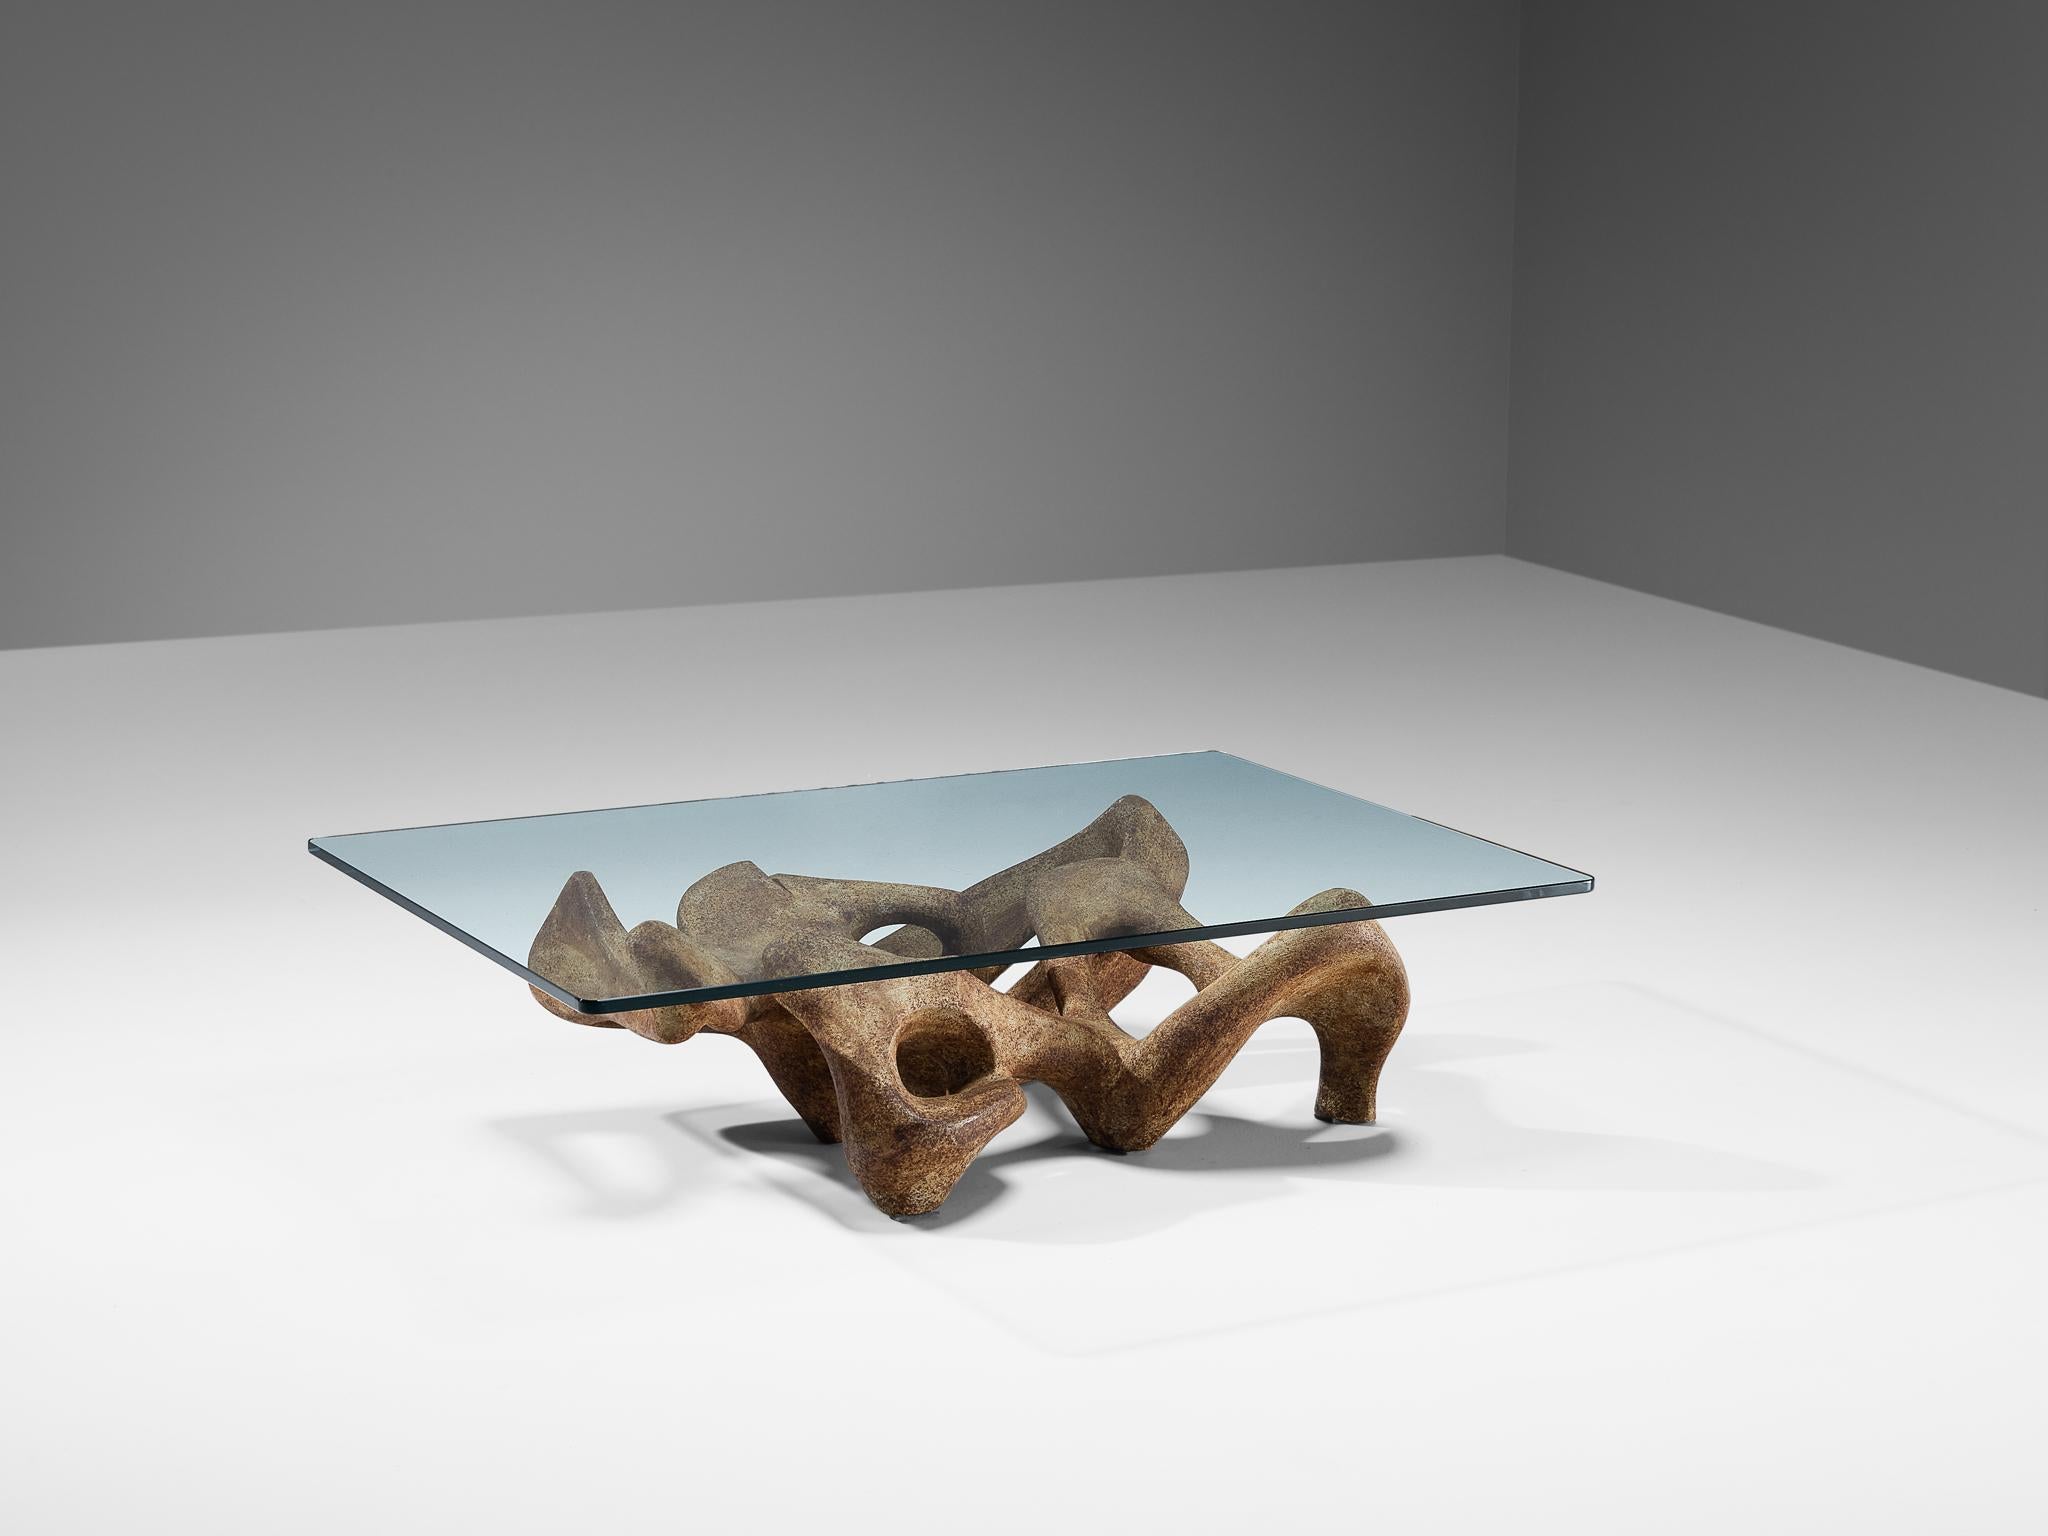 This sculptural table is attributed to the Italian designer Claudio Trevi. A sculptor by heart, which is clear to see in the design of this coffee table. The base is an organic and almost dreamlike modeled shape, executed in concrete. The